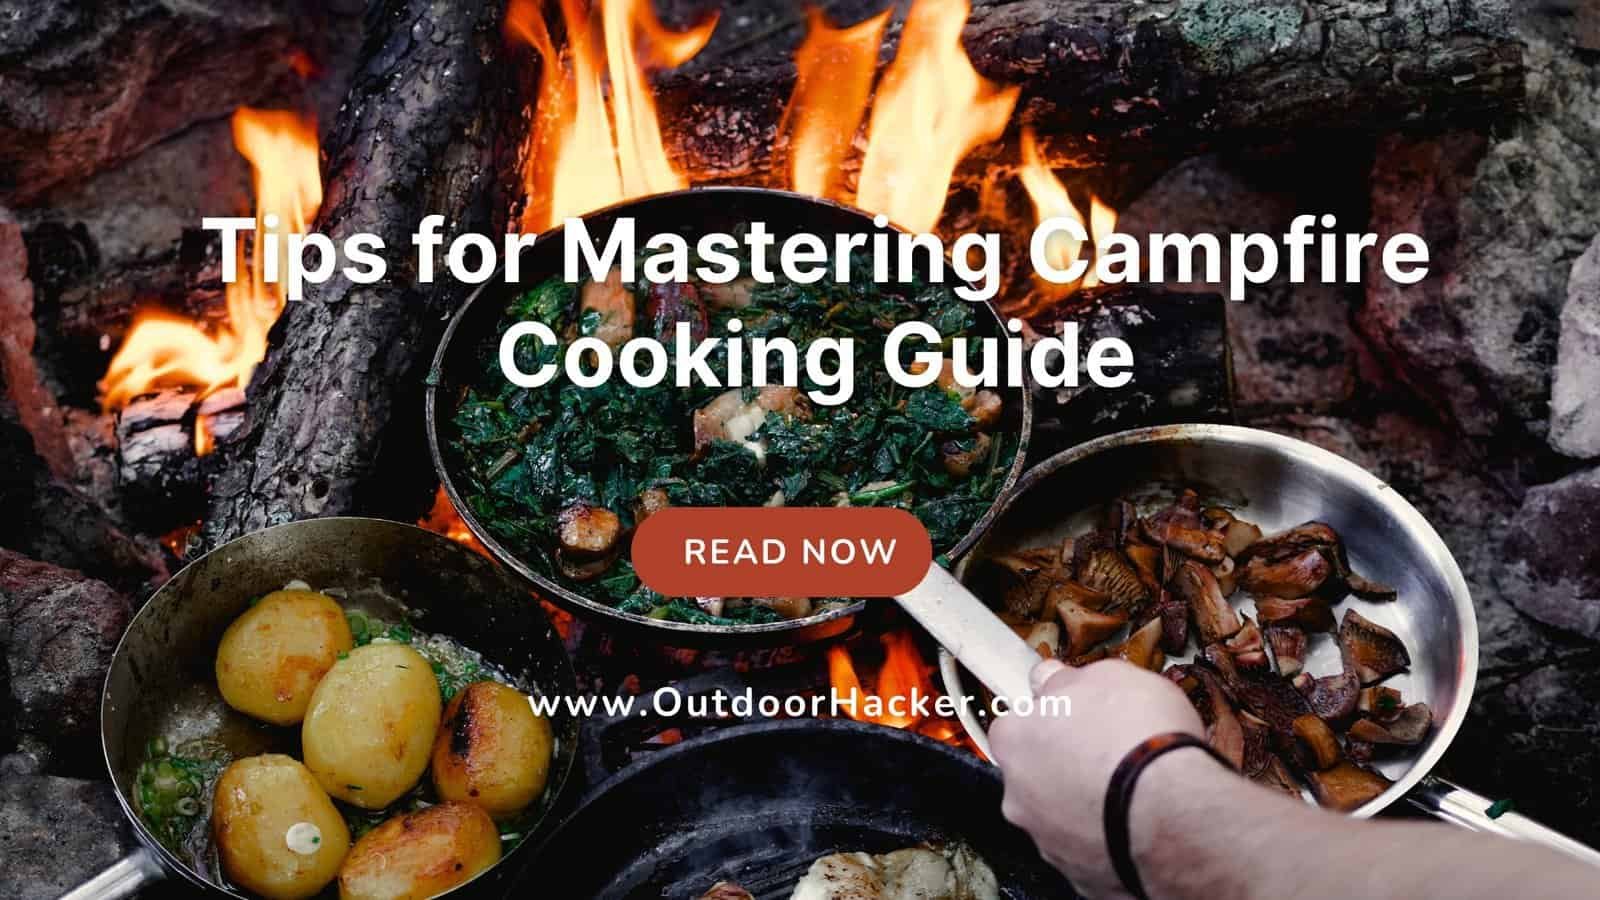 Tips for Mastering Campfire Cooking Guide